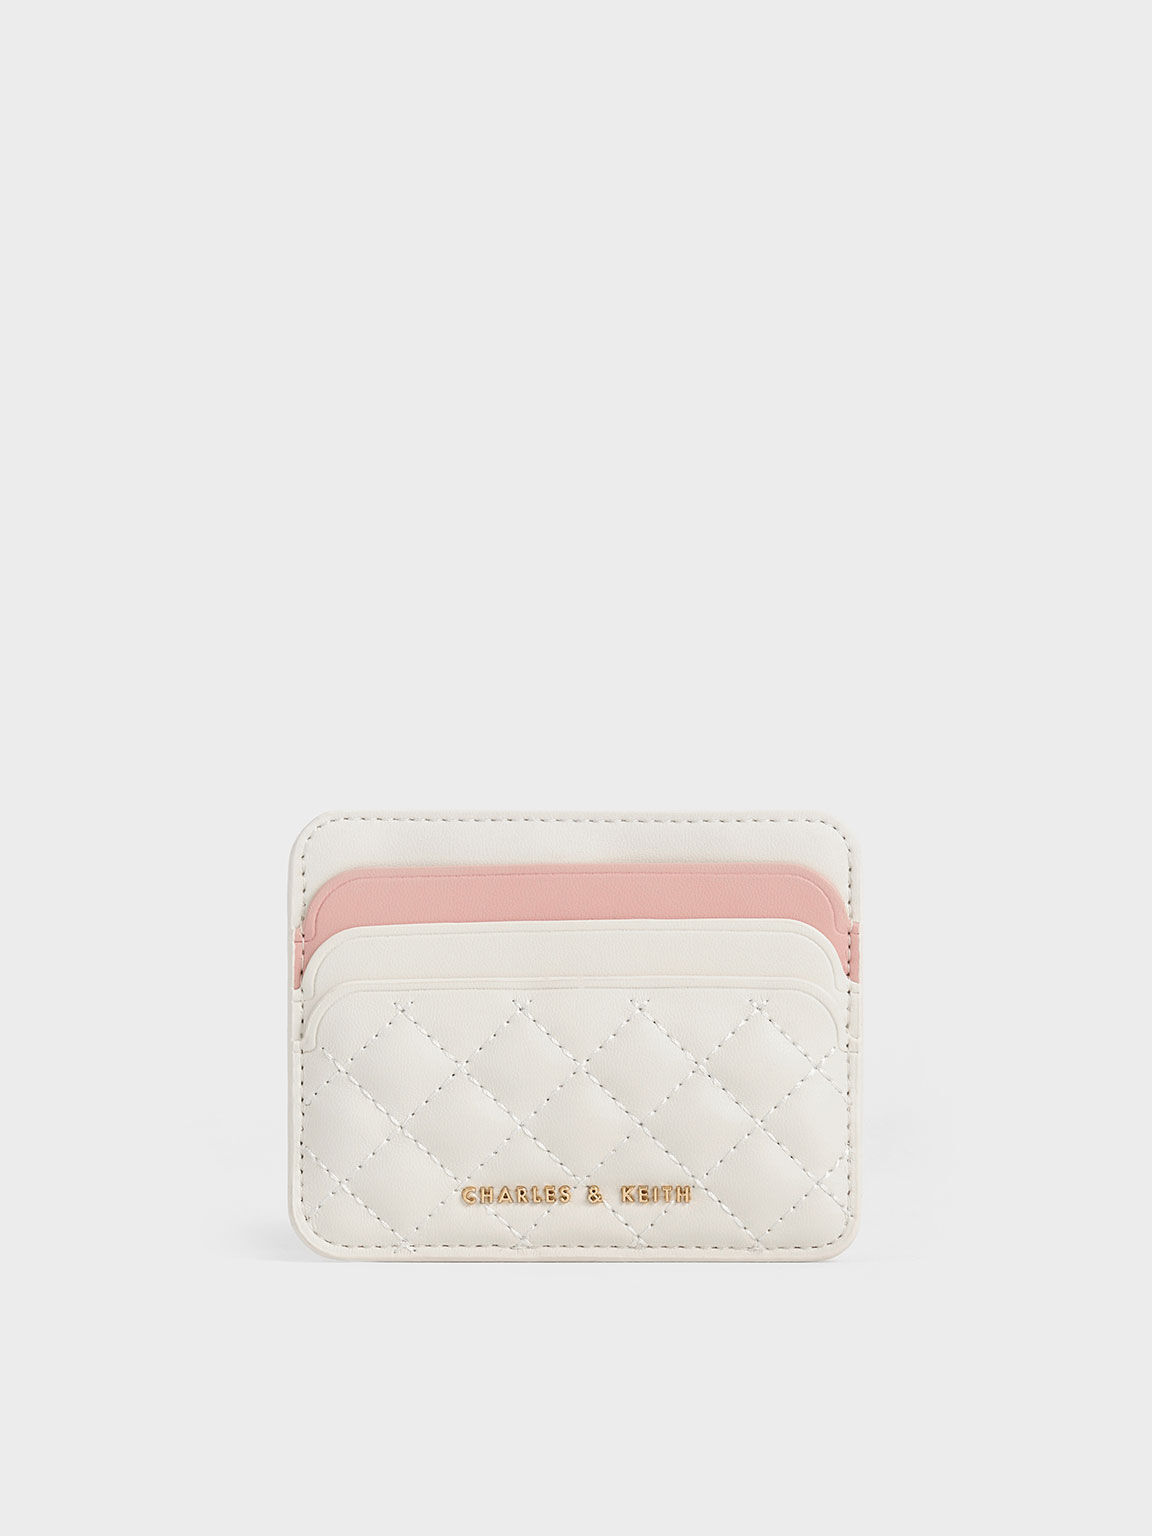 Women's Wallets | Shop Exclusive Styles | CHARLES & KEITH US